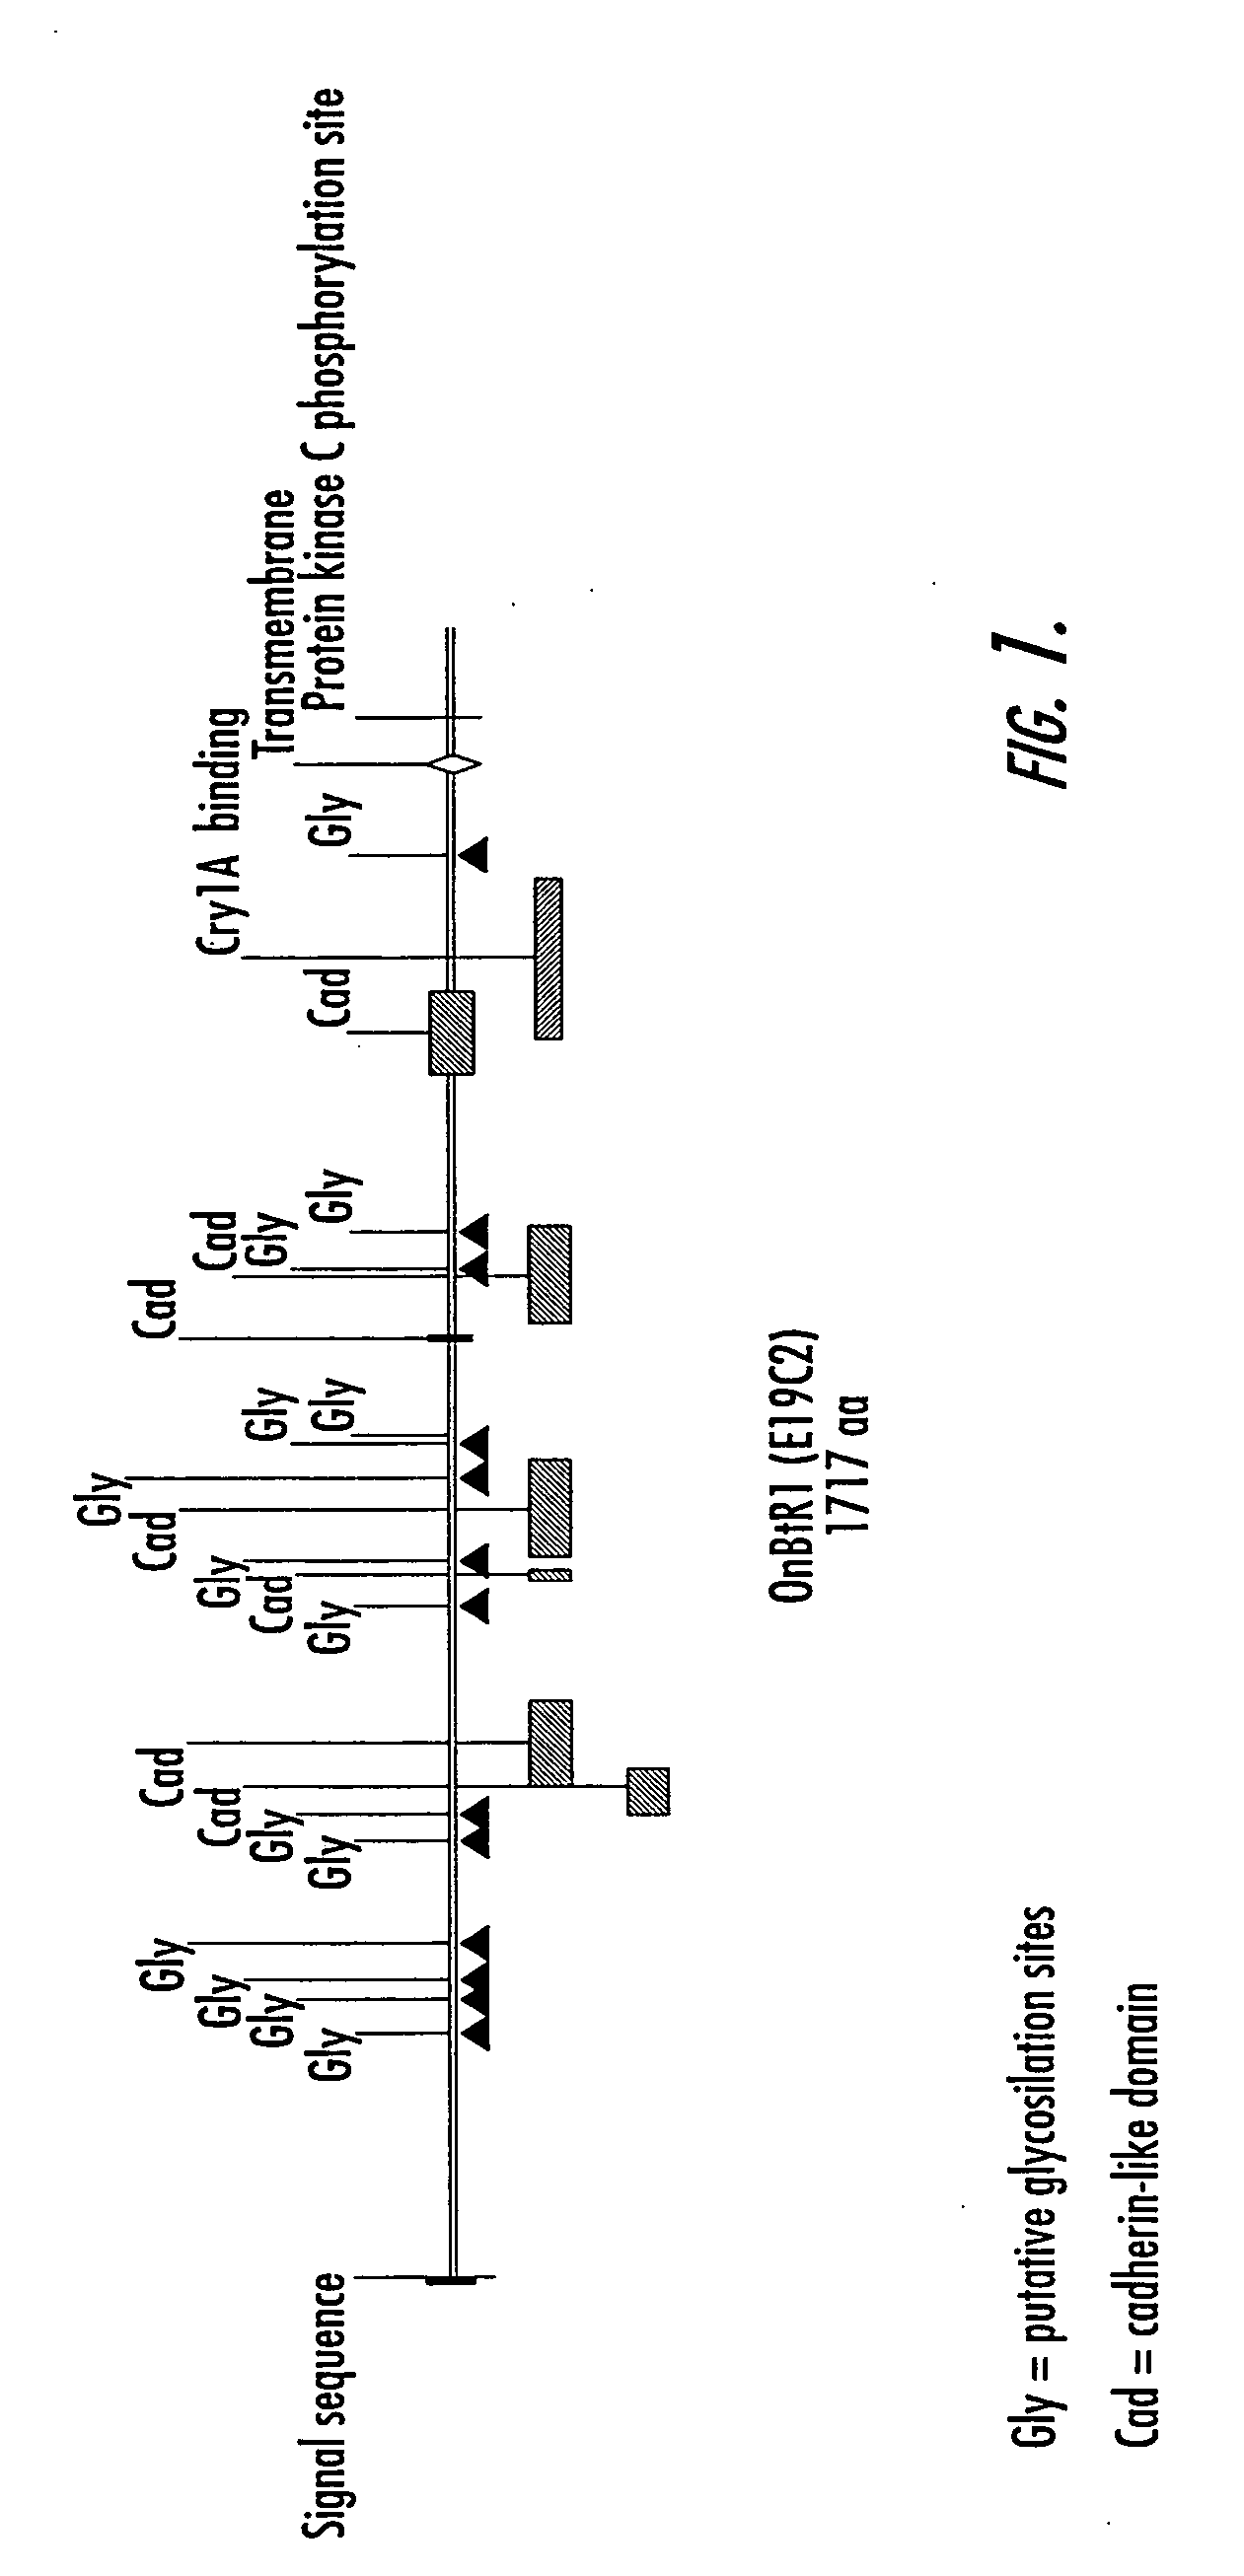 Novel Bt toxin receptors from lepidopteran insects and methods of use